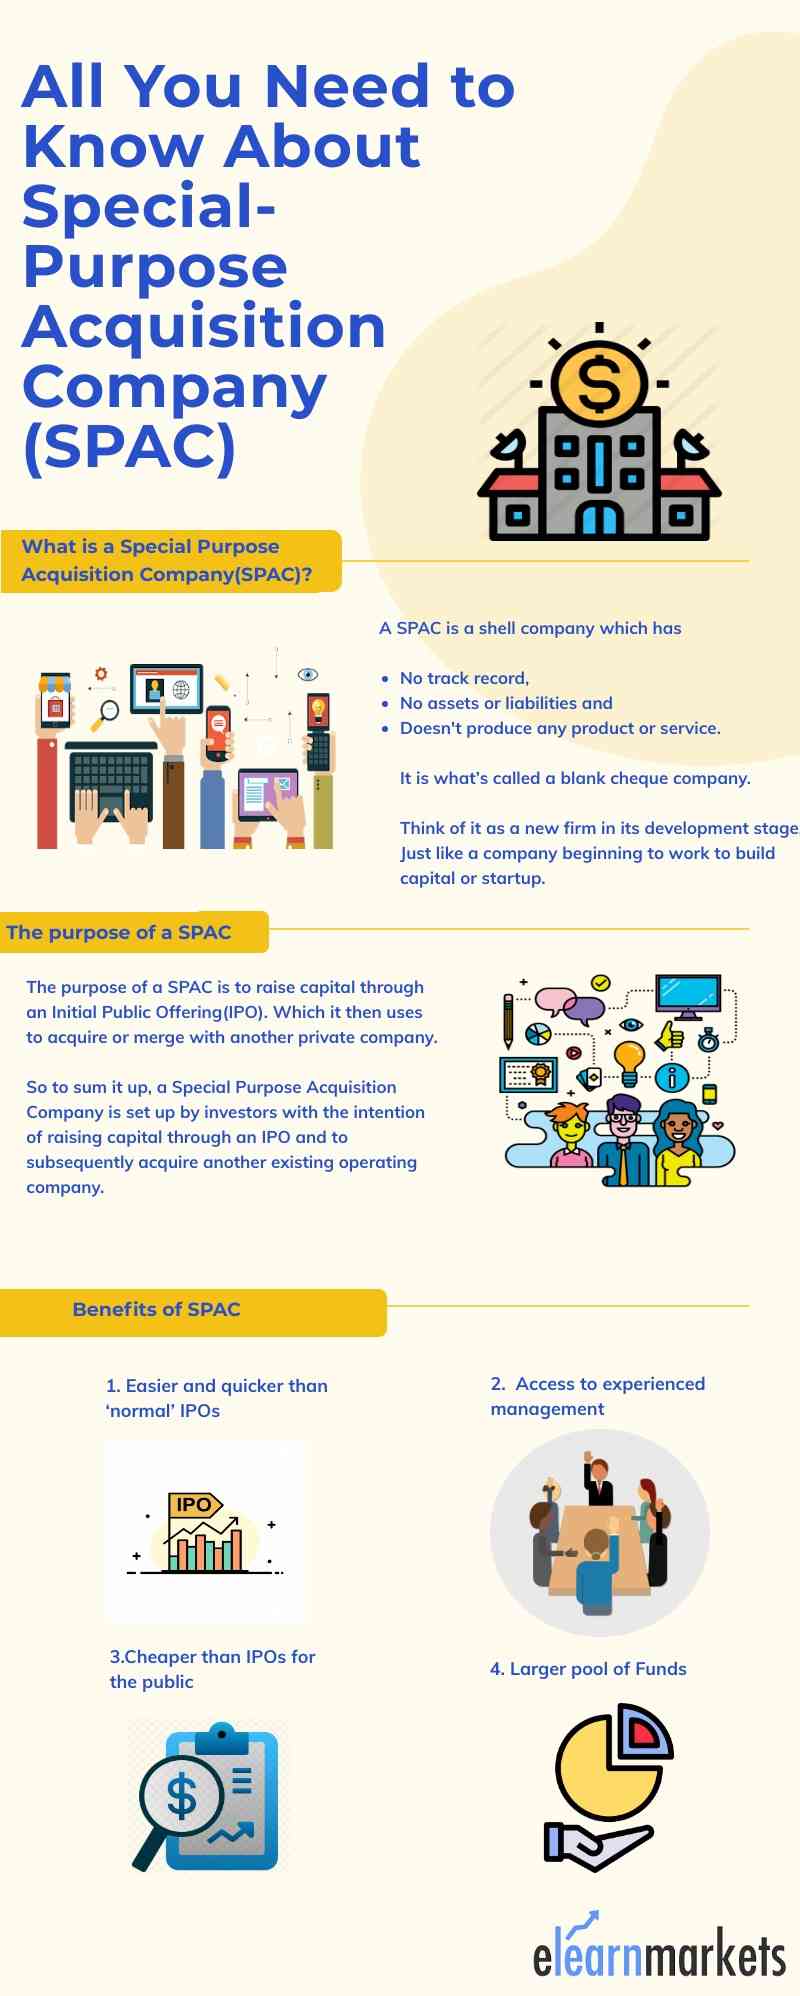 All You Need to Know About Special-Purpose Acquisition Company (SPAC) 2